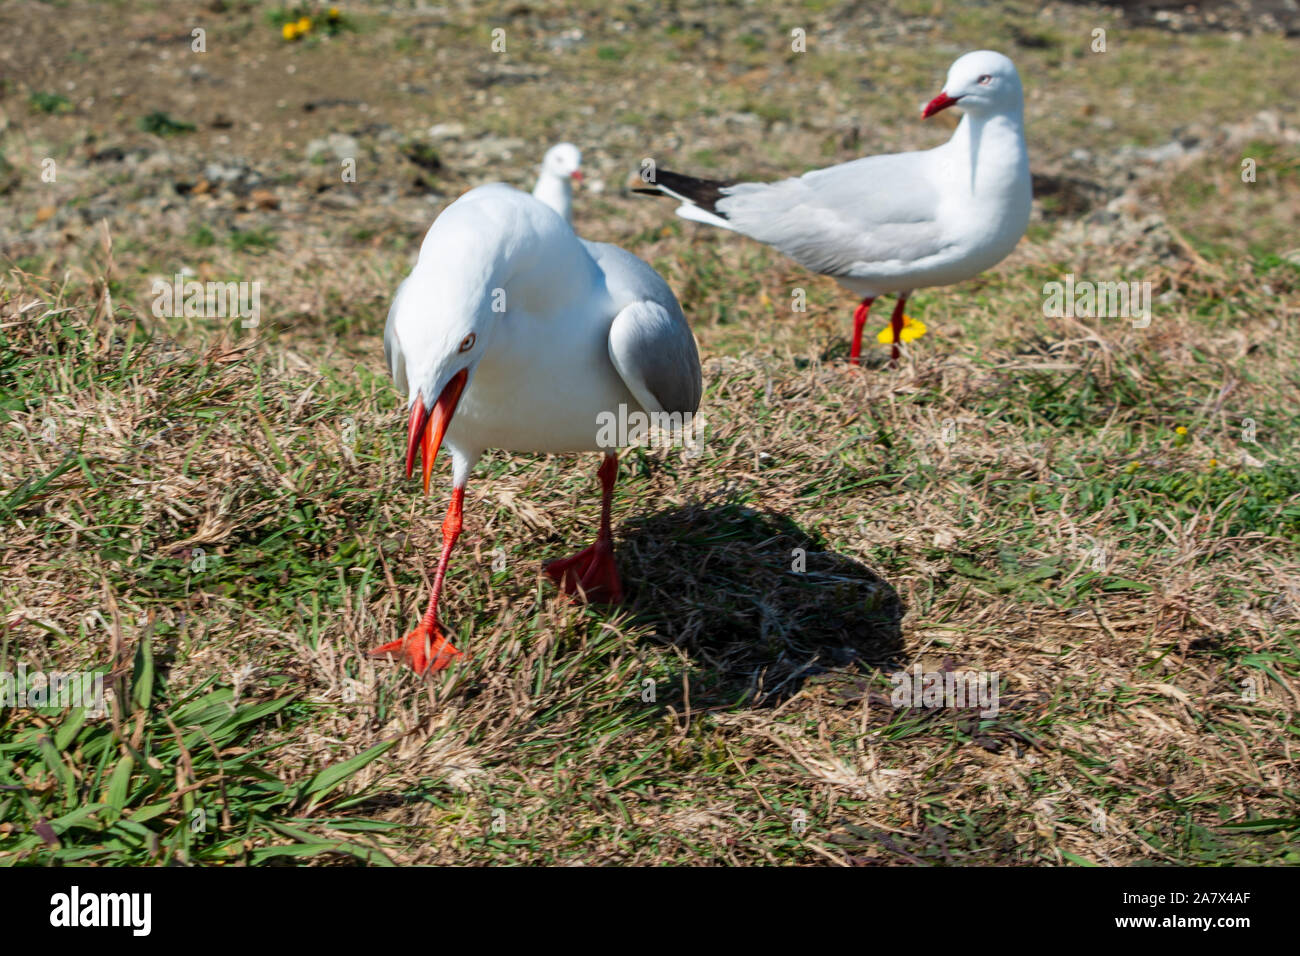 Australian Birds, Silver Gulls. A cranky seagull running along the grass, screeching loudly defending its space while its passive mate looks on. Stock Photo